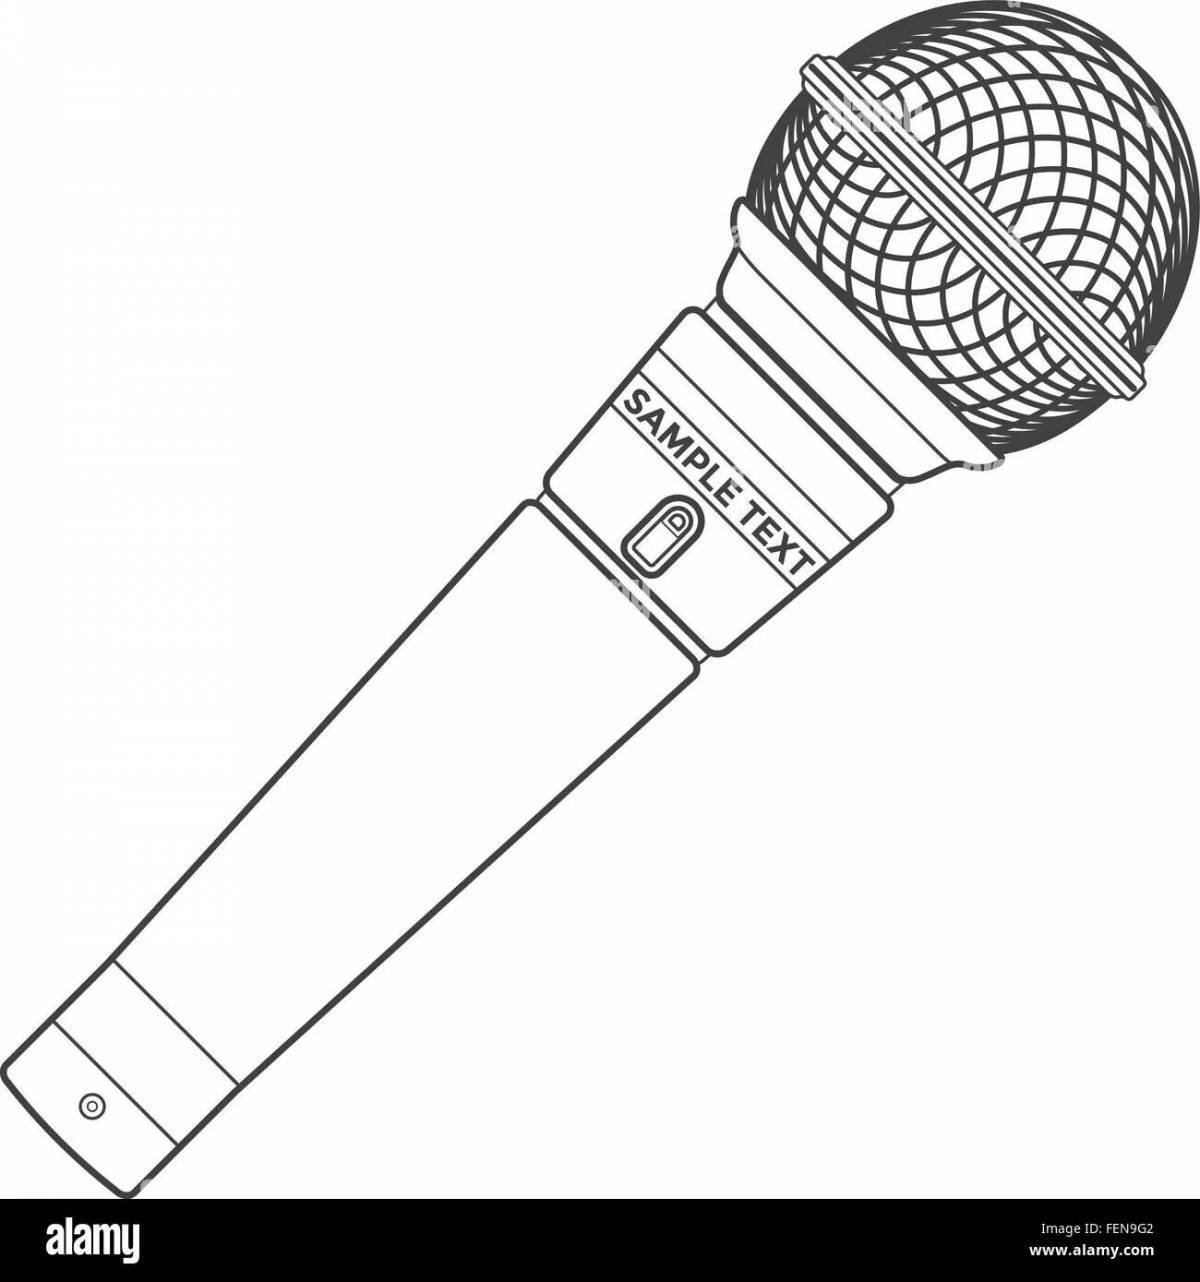 Playful microphone coloring page for kids